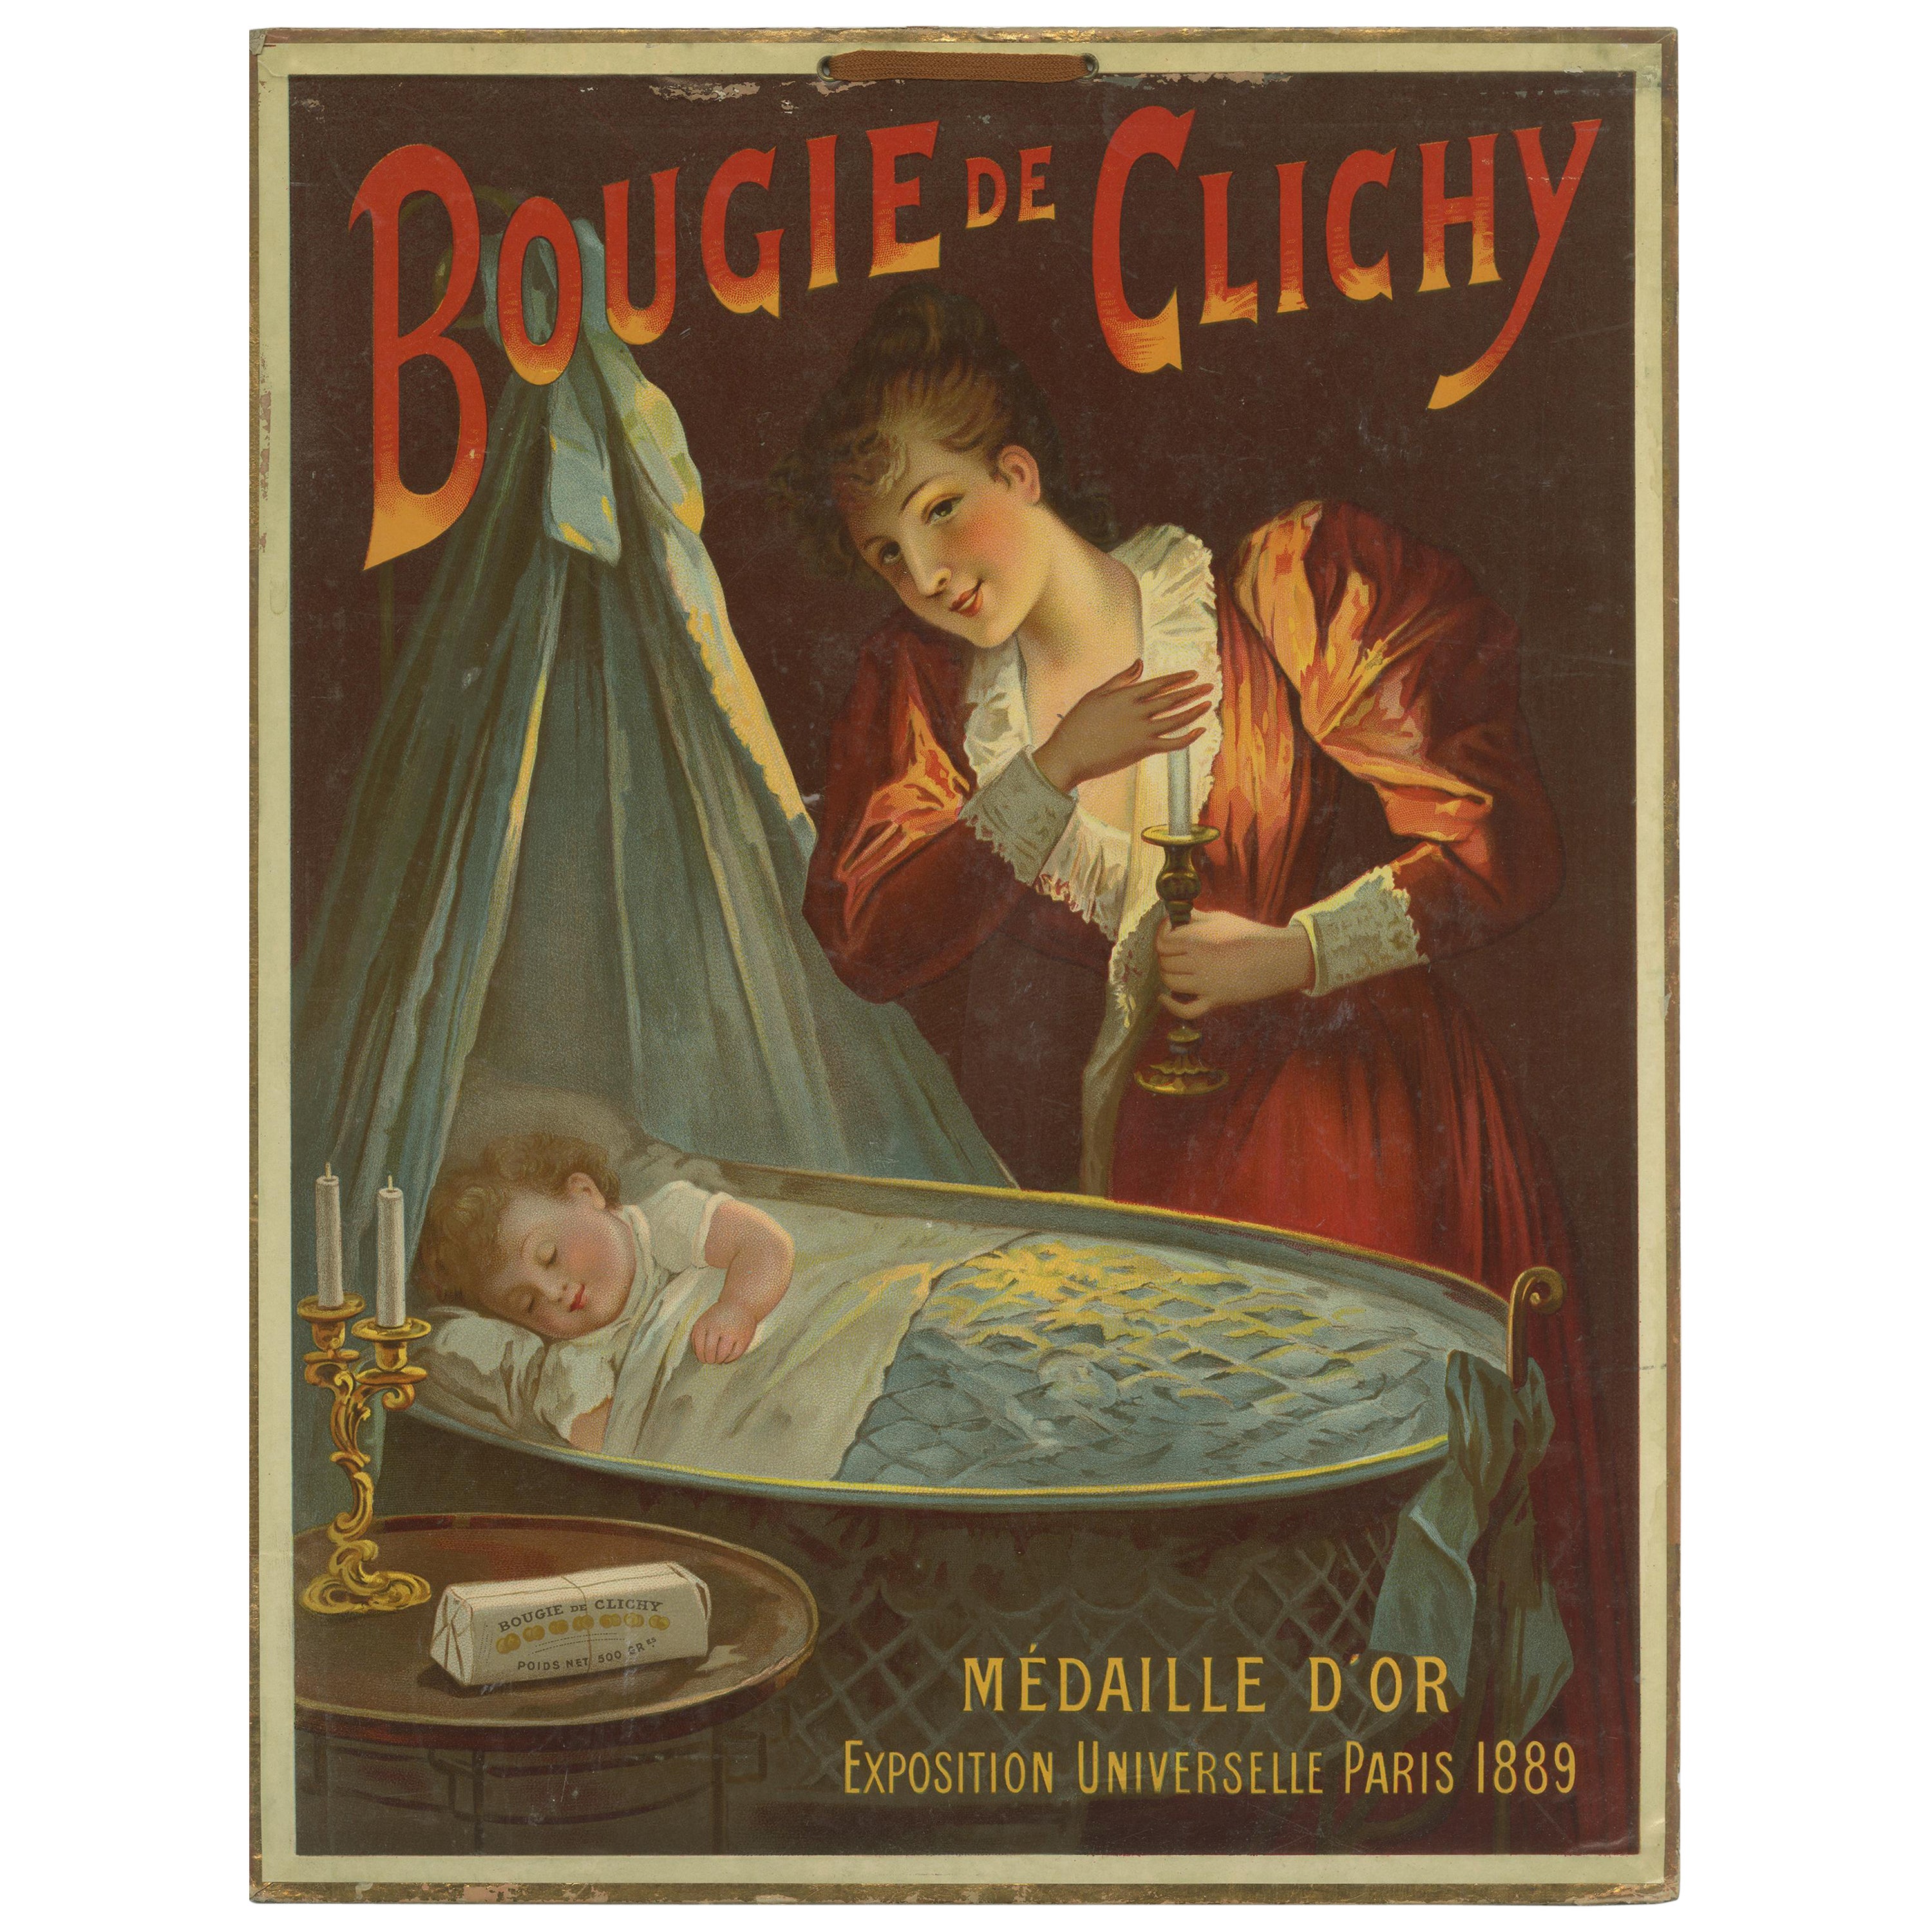 Original Vintage Lithograph on Board Promoting Candles, ca.1900